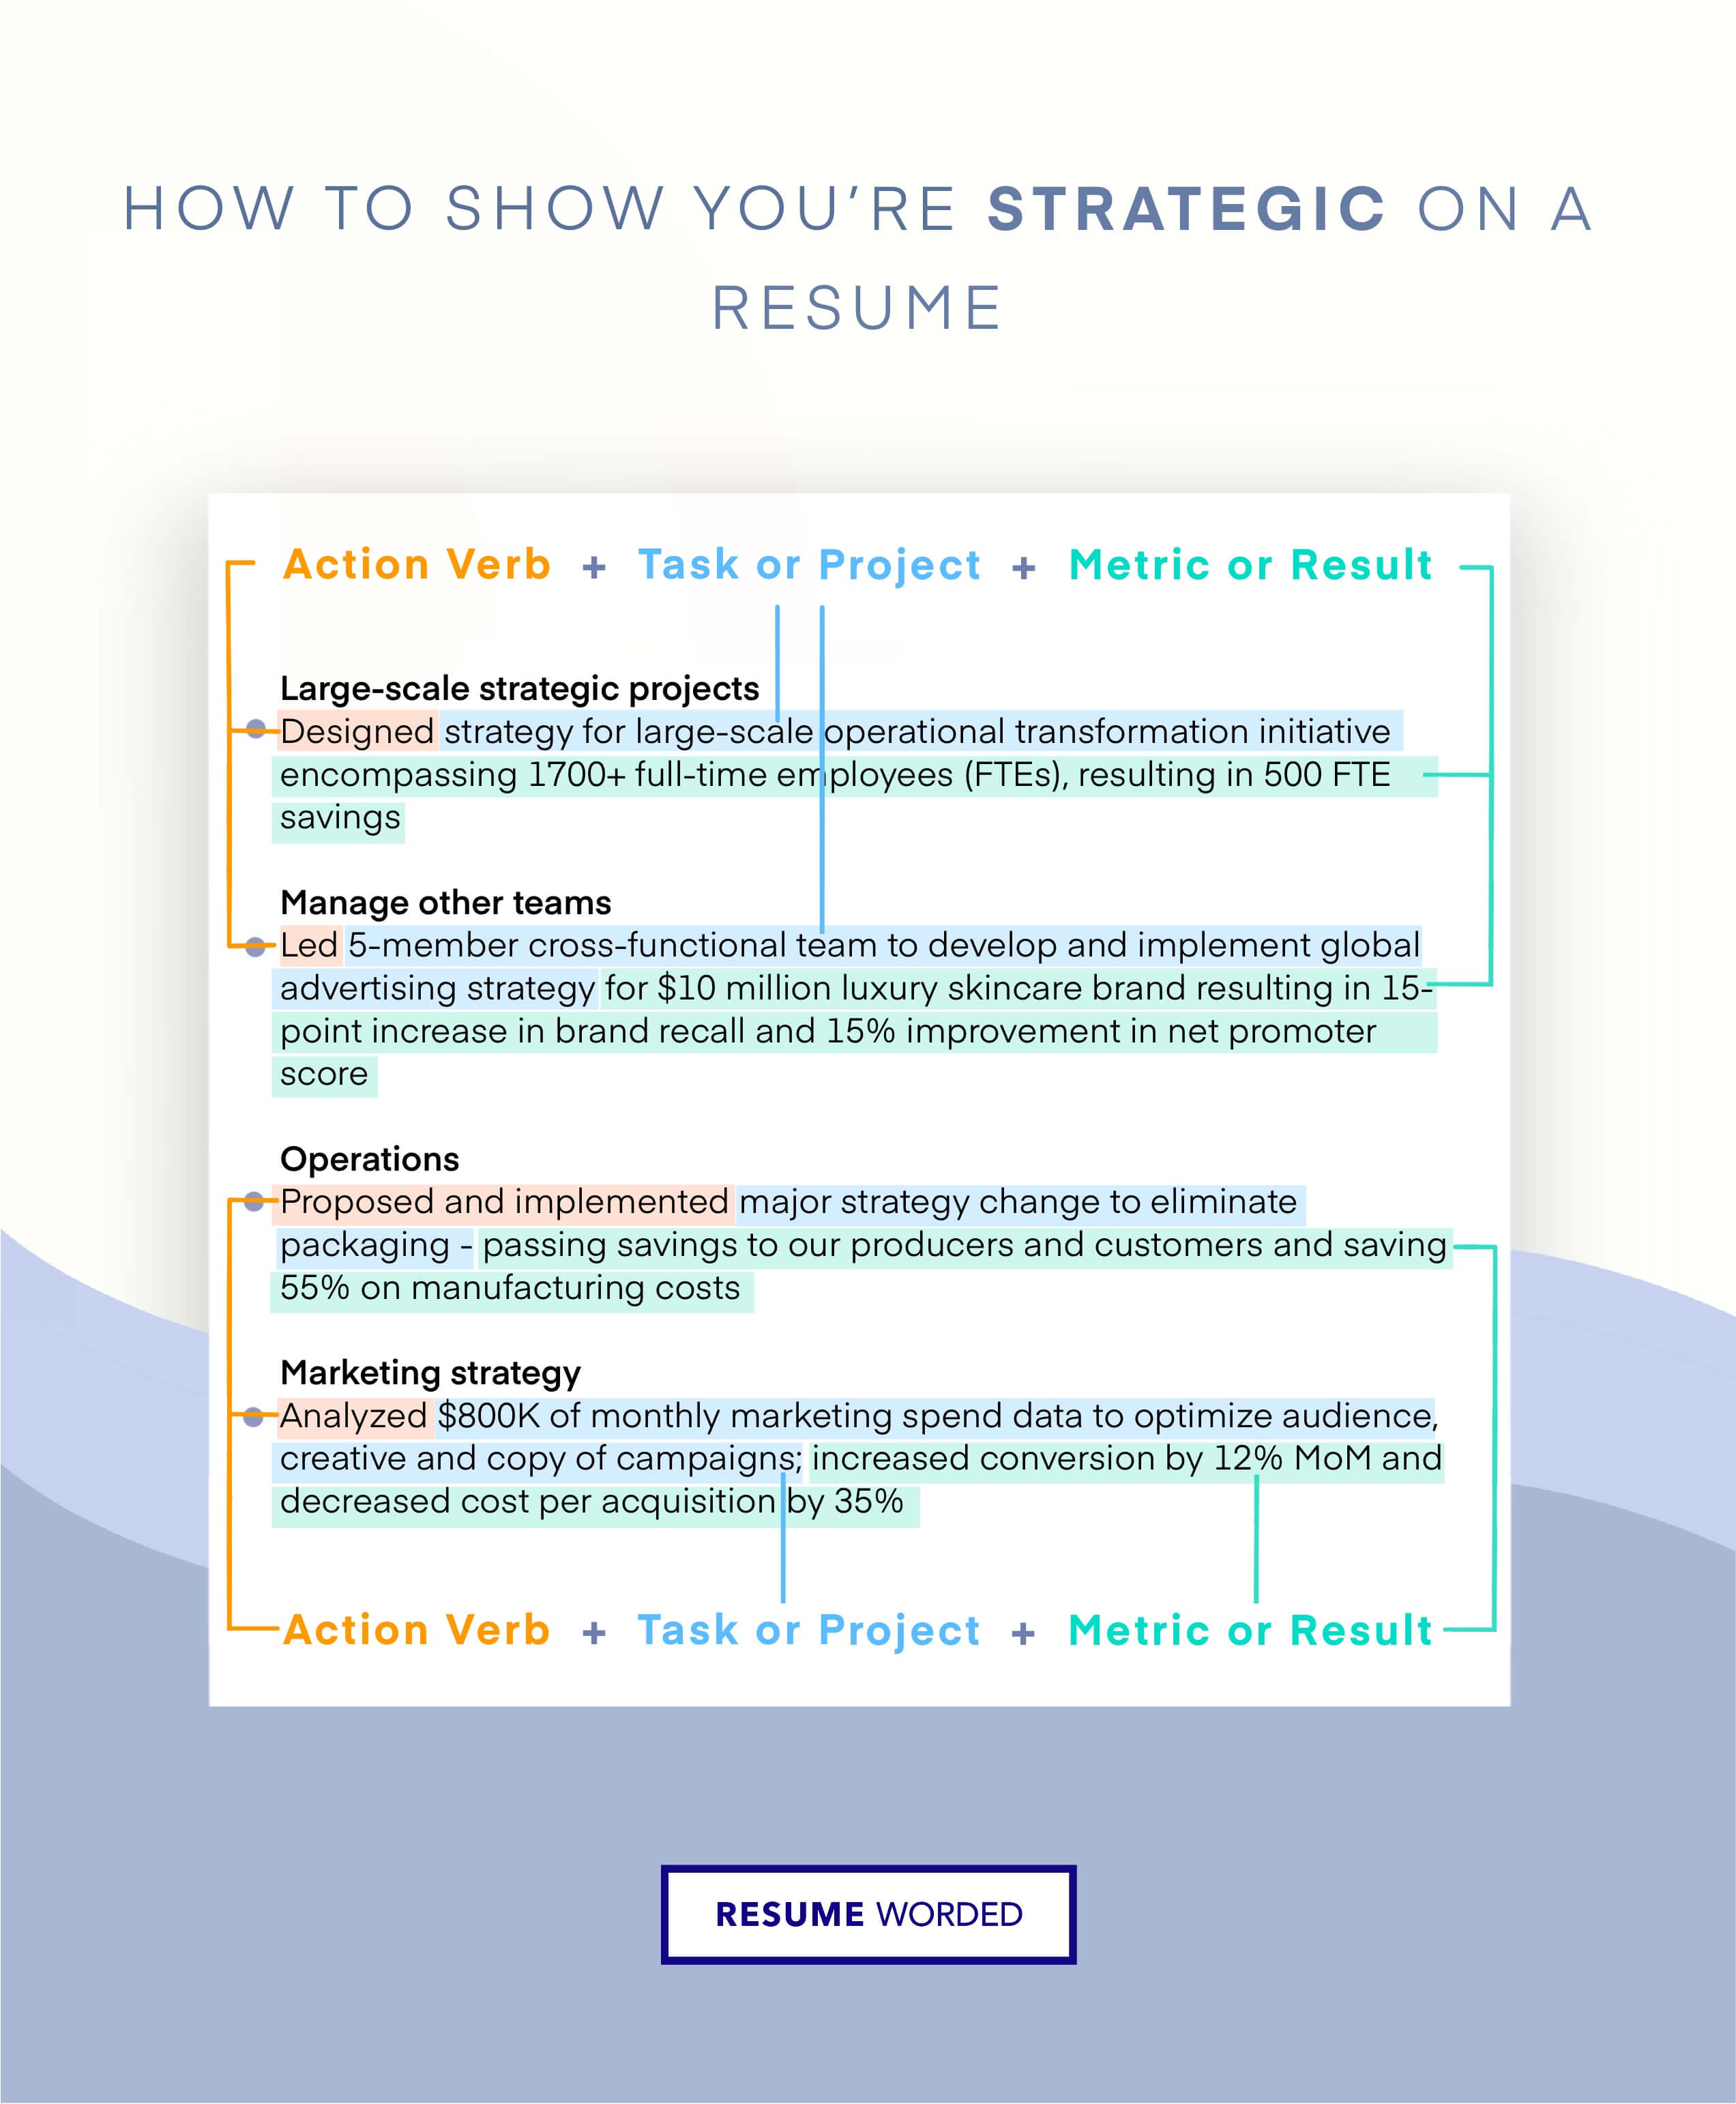 Exhibit your strategic financial planning skills - Director of Accounting Resume